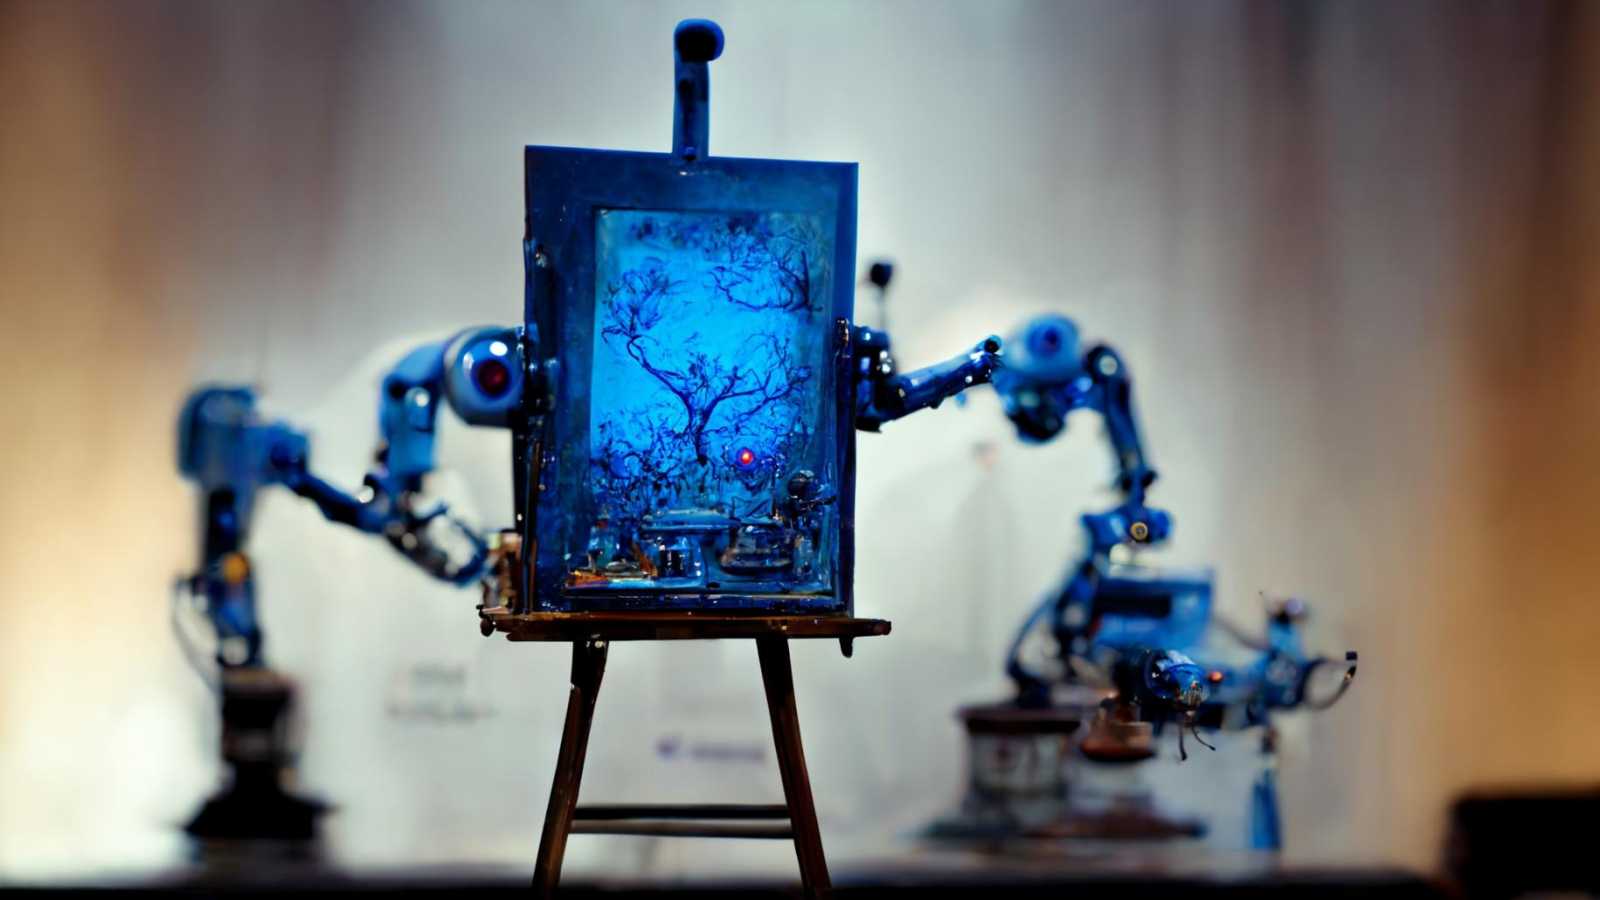 002-davida752_blue_shiny_four_handed_robot_painting_a_pictur